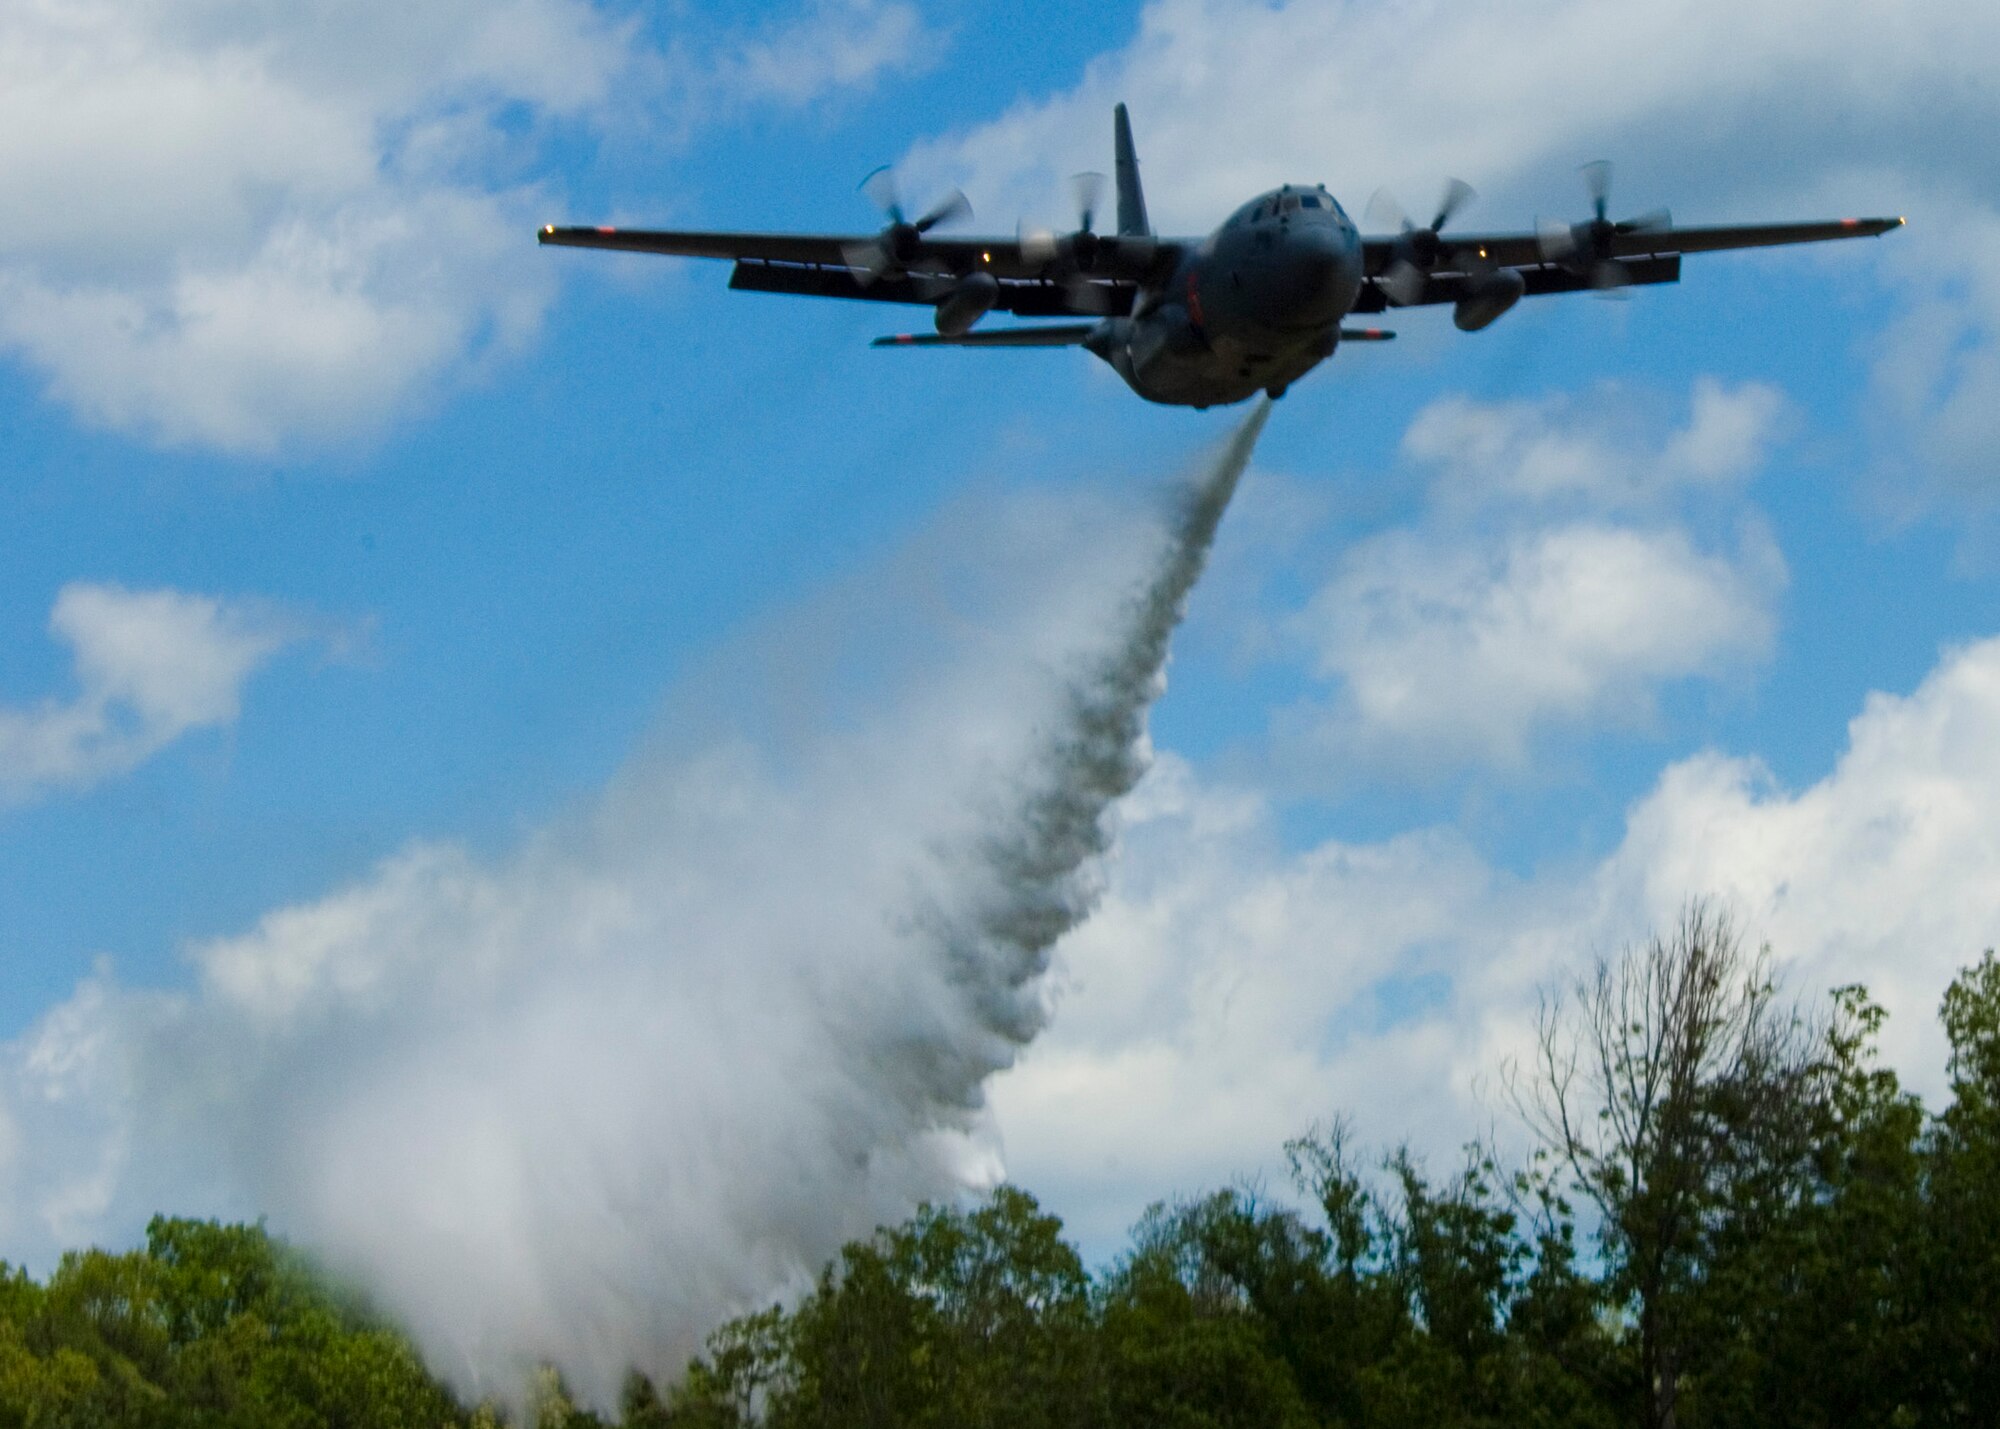 A C-130 from the 146th Airlift Wing located in Port Hueneme, Calif. drops water over the treetops in South Carolina. Modular Airborne Fire Fighting System, known as MAFFS, commenced annual training and certification this week in Greenville, S.C. April 26 to April 30, 2010. Photo by Airman 1st Class Nicholas Carzis